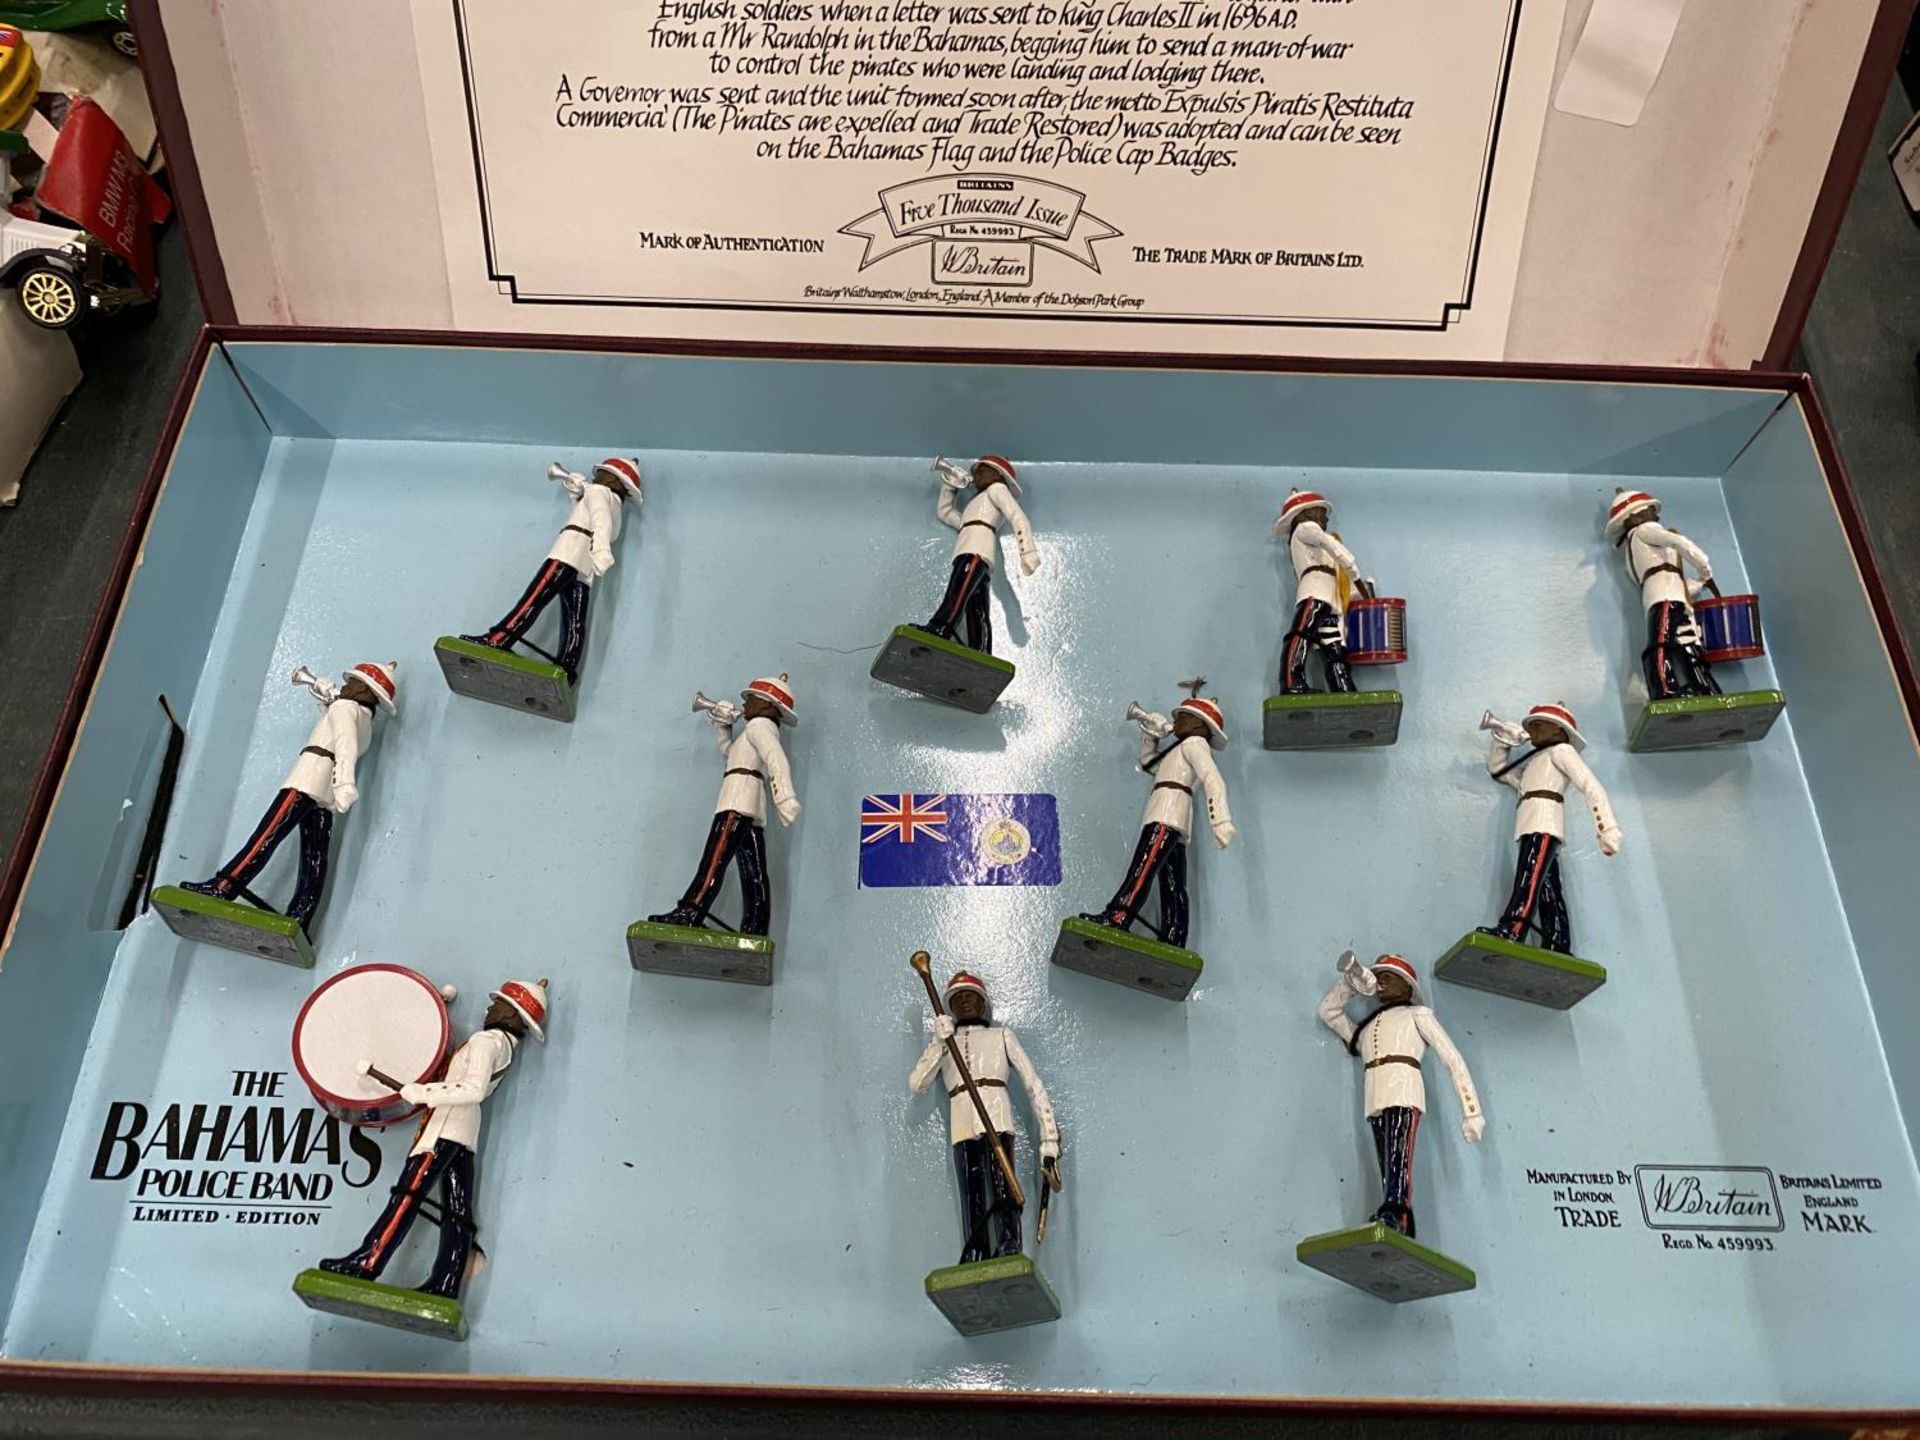 A BOXED BRITAINS 1987 NO 2186 OF 5000 LIMITED EDITION SET OF THE BAHAMAS POLICE BAND - Image 5 of 6